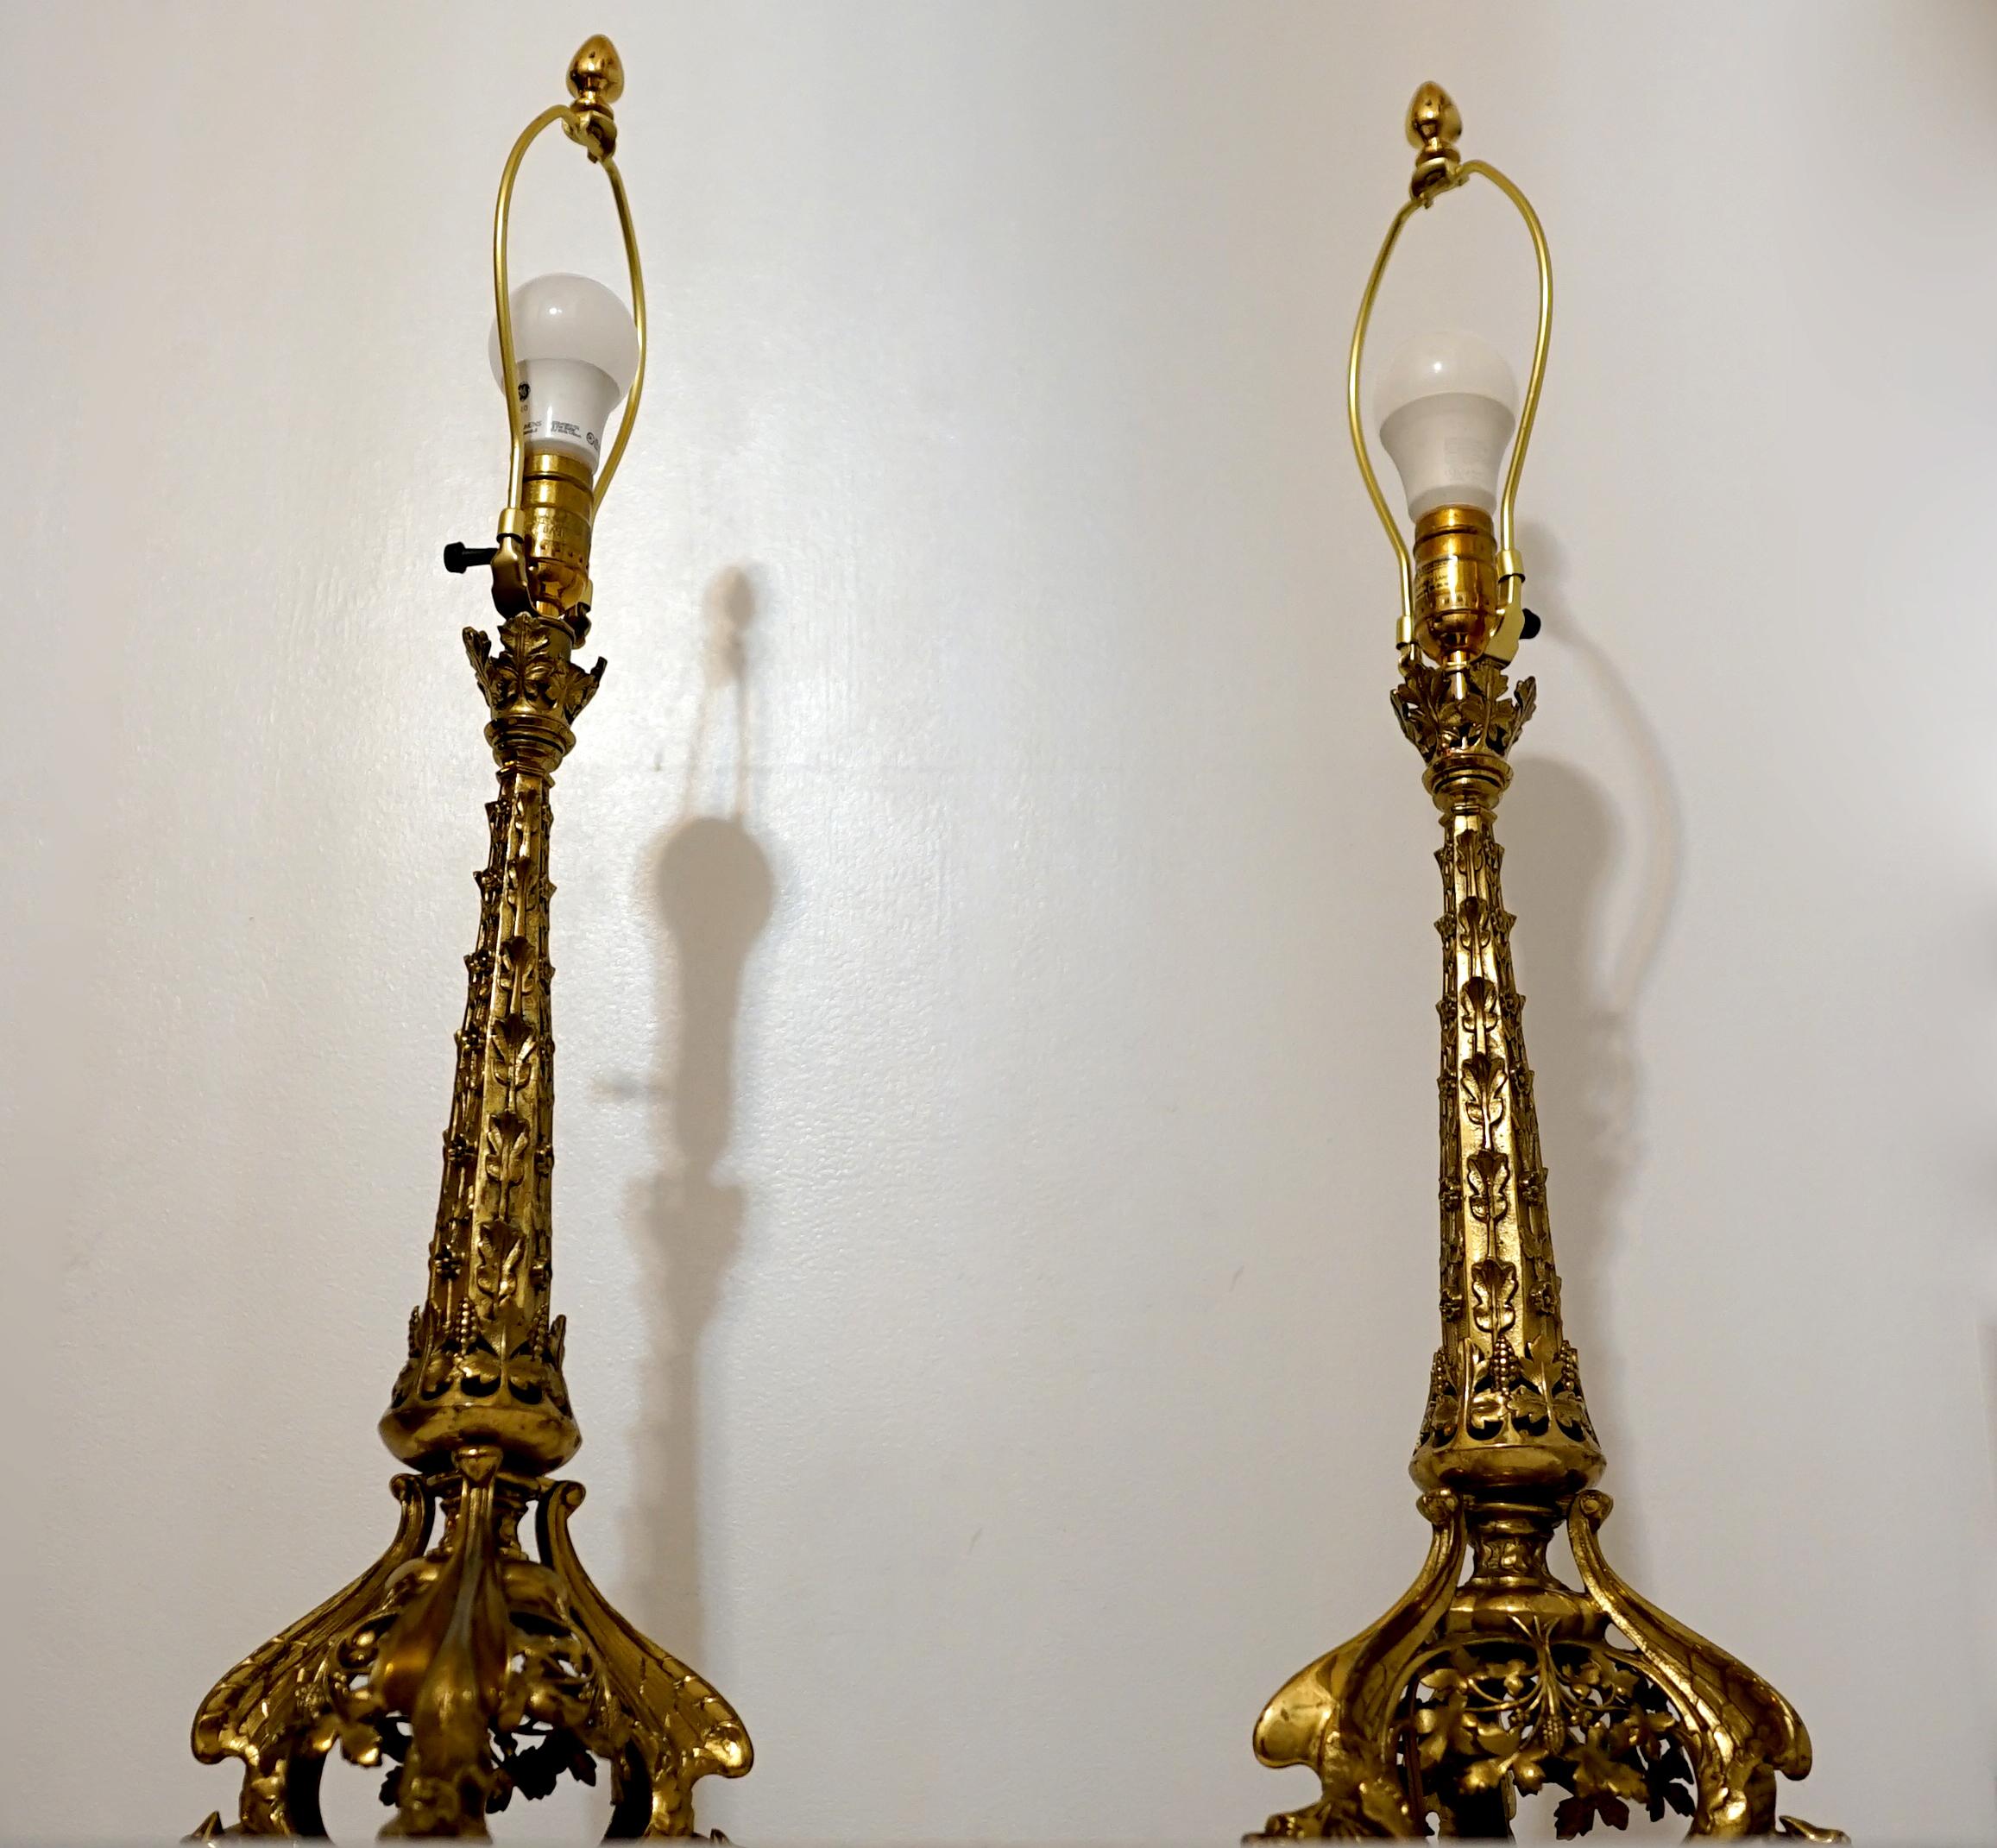 Pair of Cast Gilt Gargoyle Tower Bronze or Brass Table Lamps with Shades In Good Condition For Sale In Lomita, CA